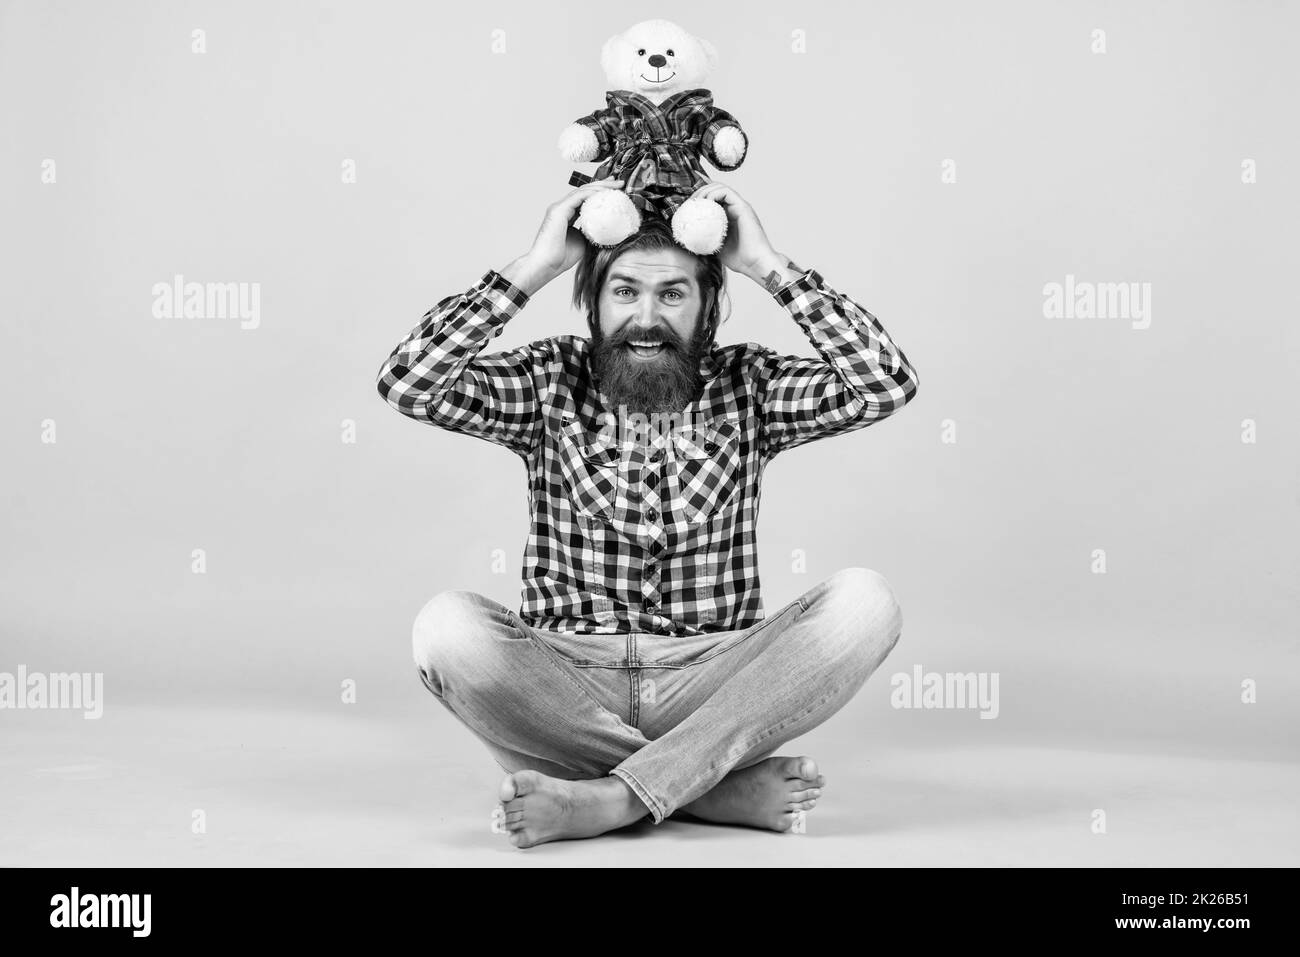 Caucasian mature hipster with trendy hairstyle in checkered shirt hold teddy bear toy, fun Stock Photo